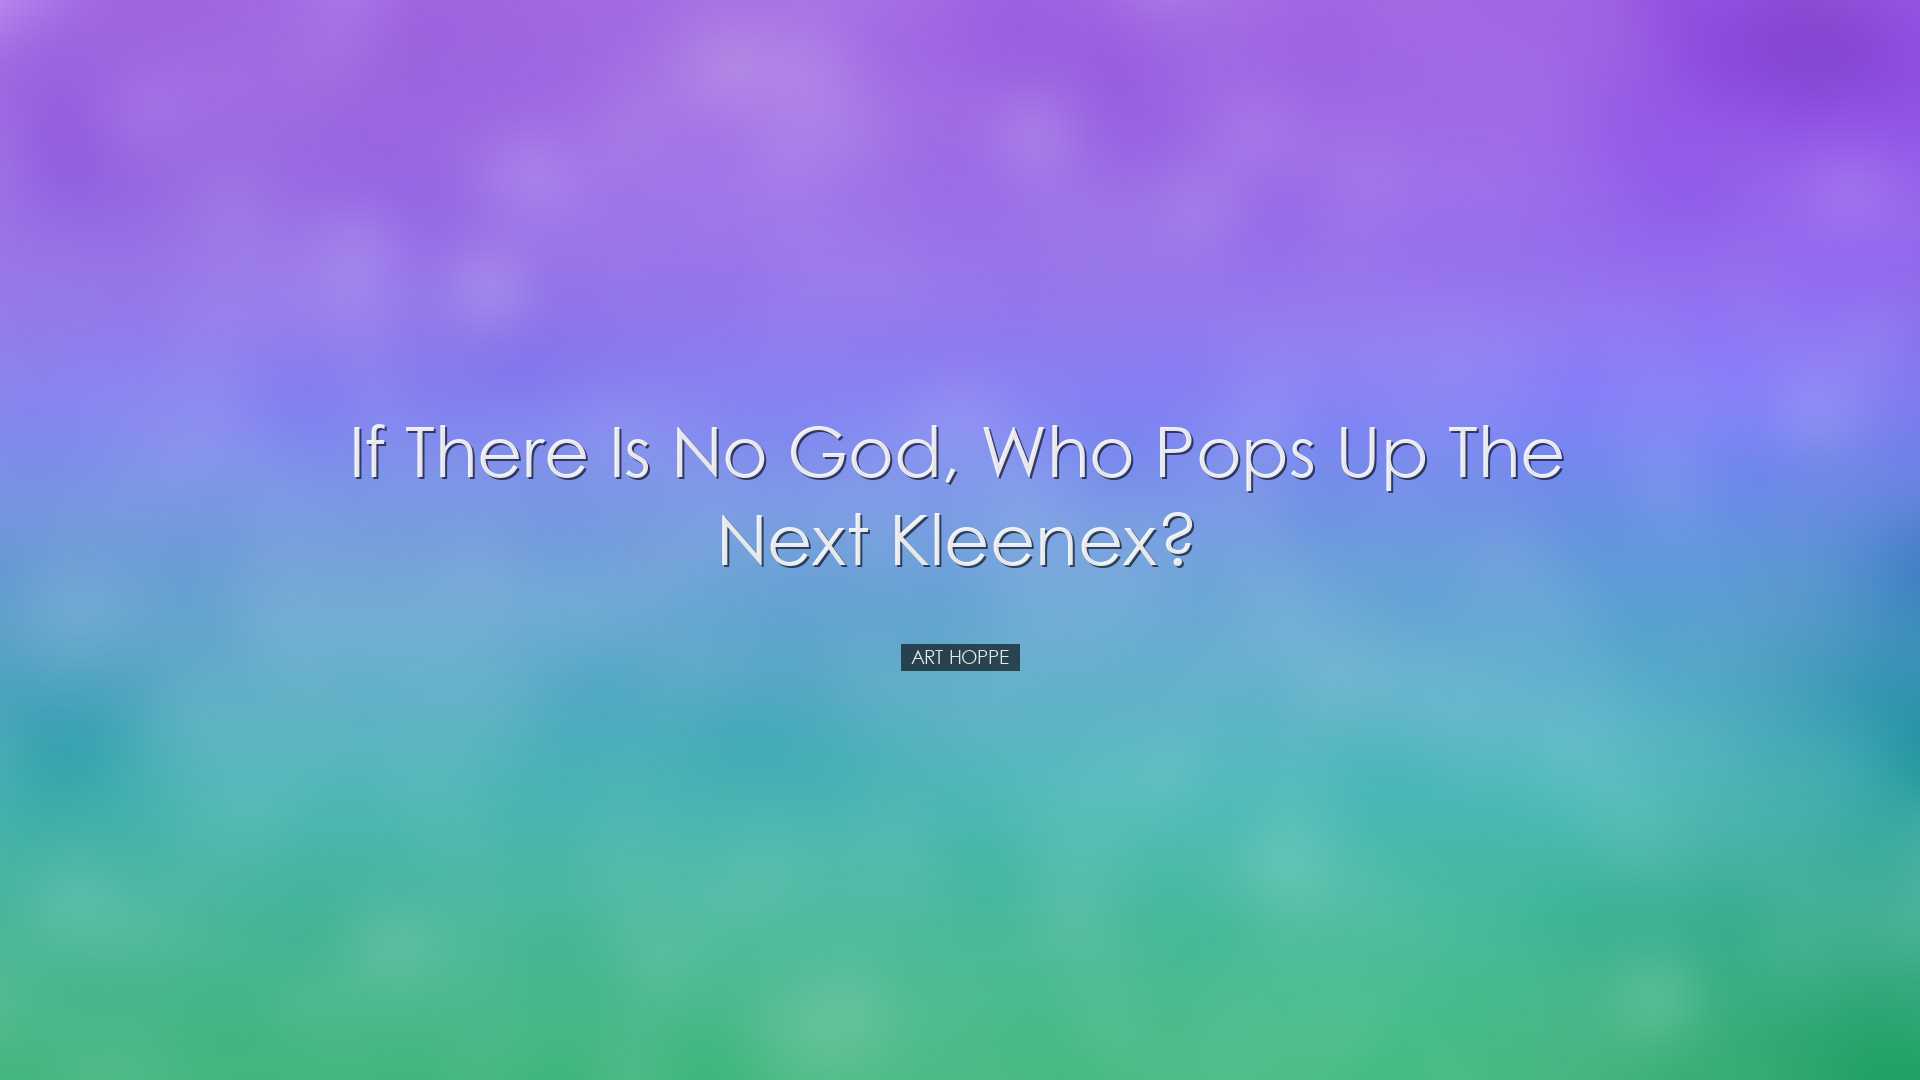 If there is no God, who pops up the next Kleenex? - Art Hoppe